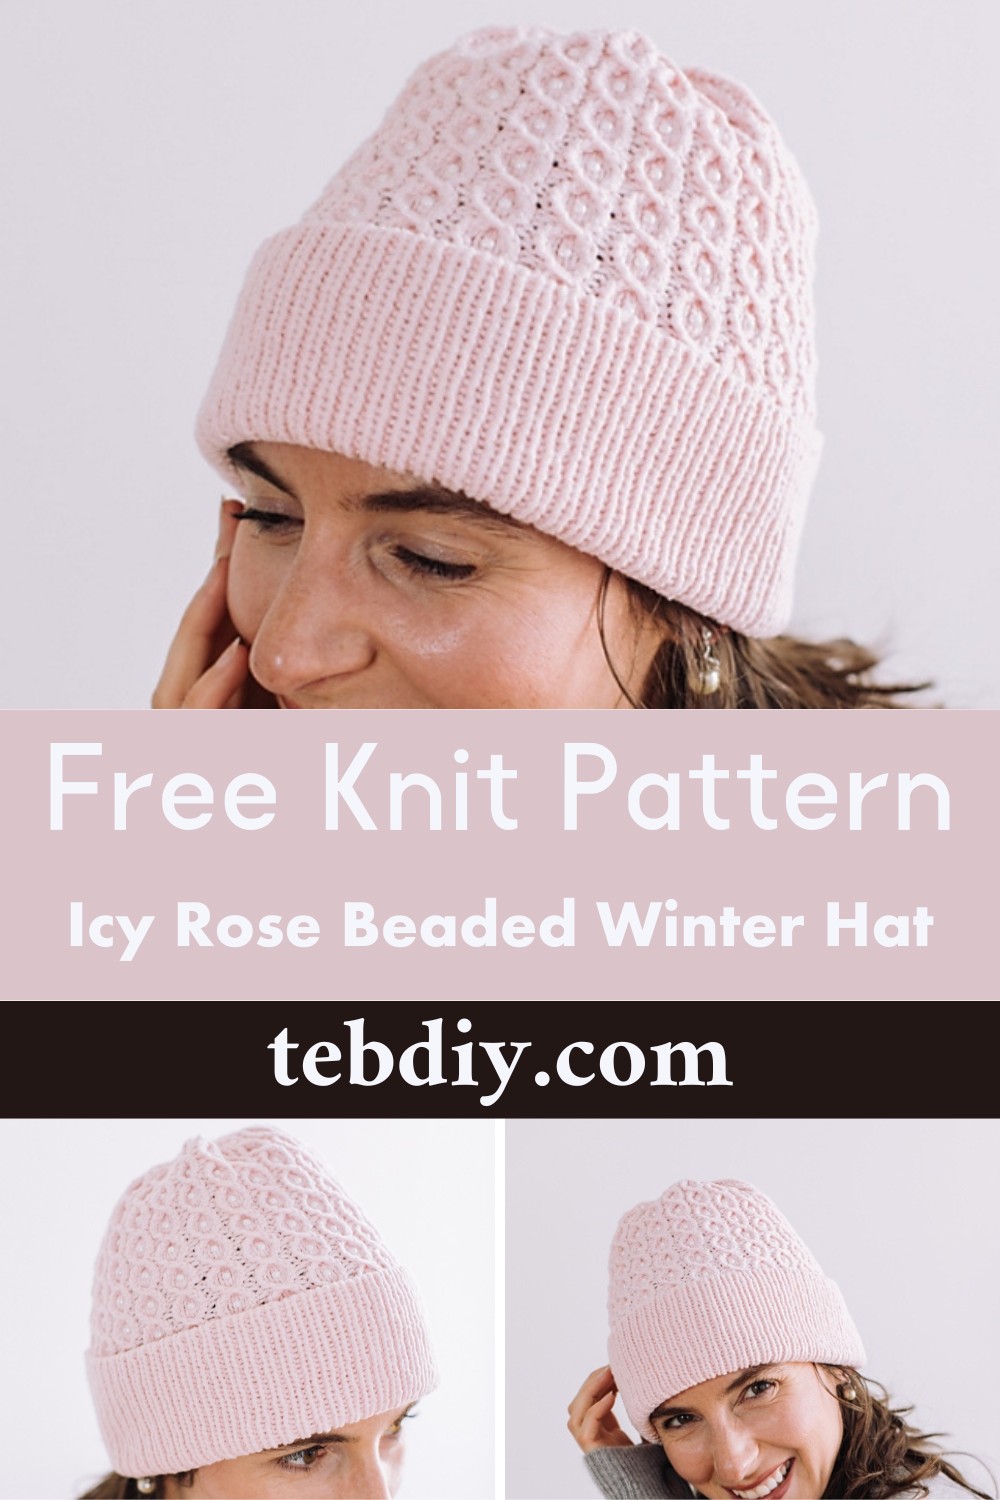 Icy Rose Beaded Winter Hat